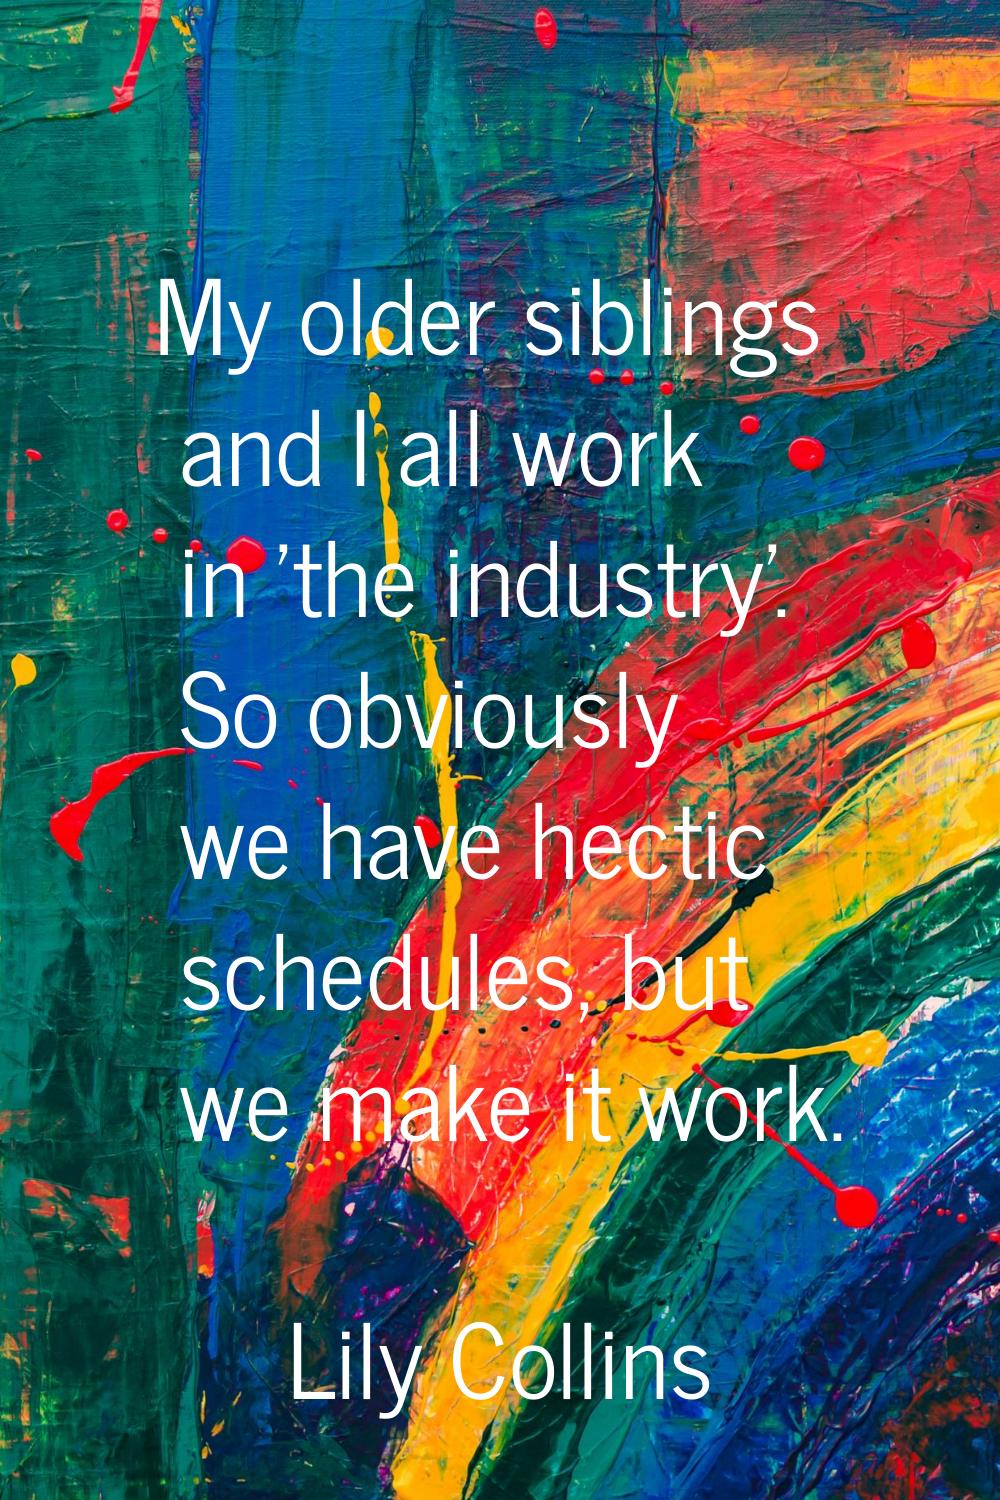 My older siblings and I all work in 'the industry'. So obviously we have hectic schedules, but we m